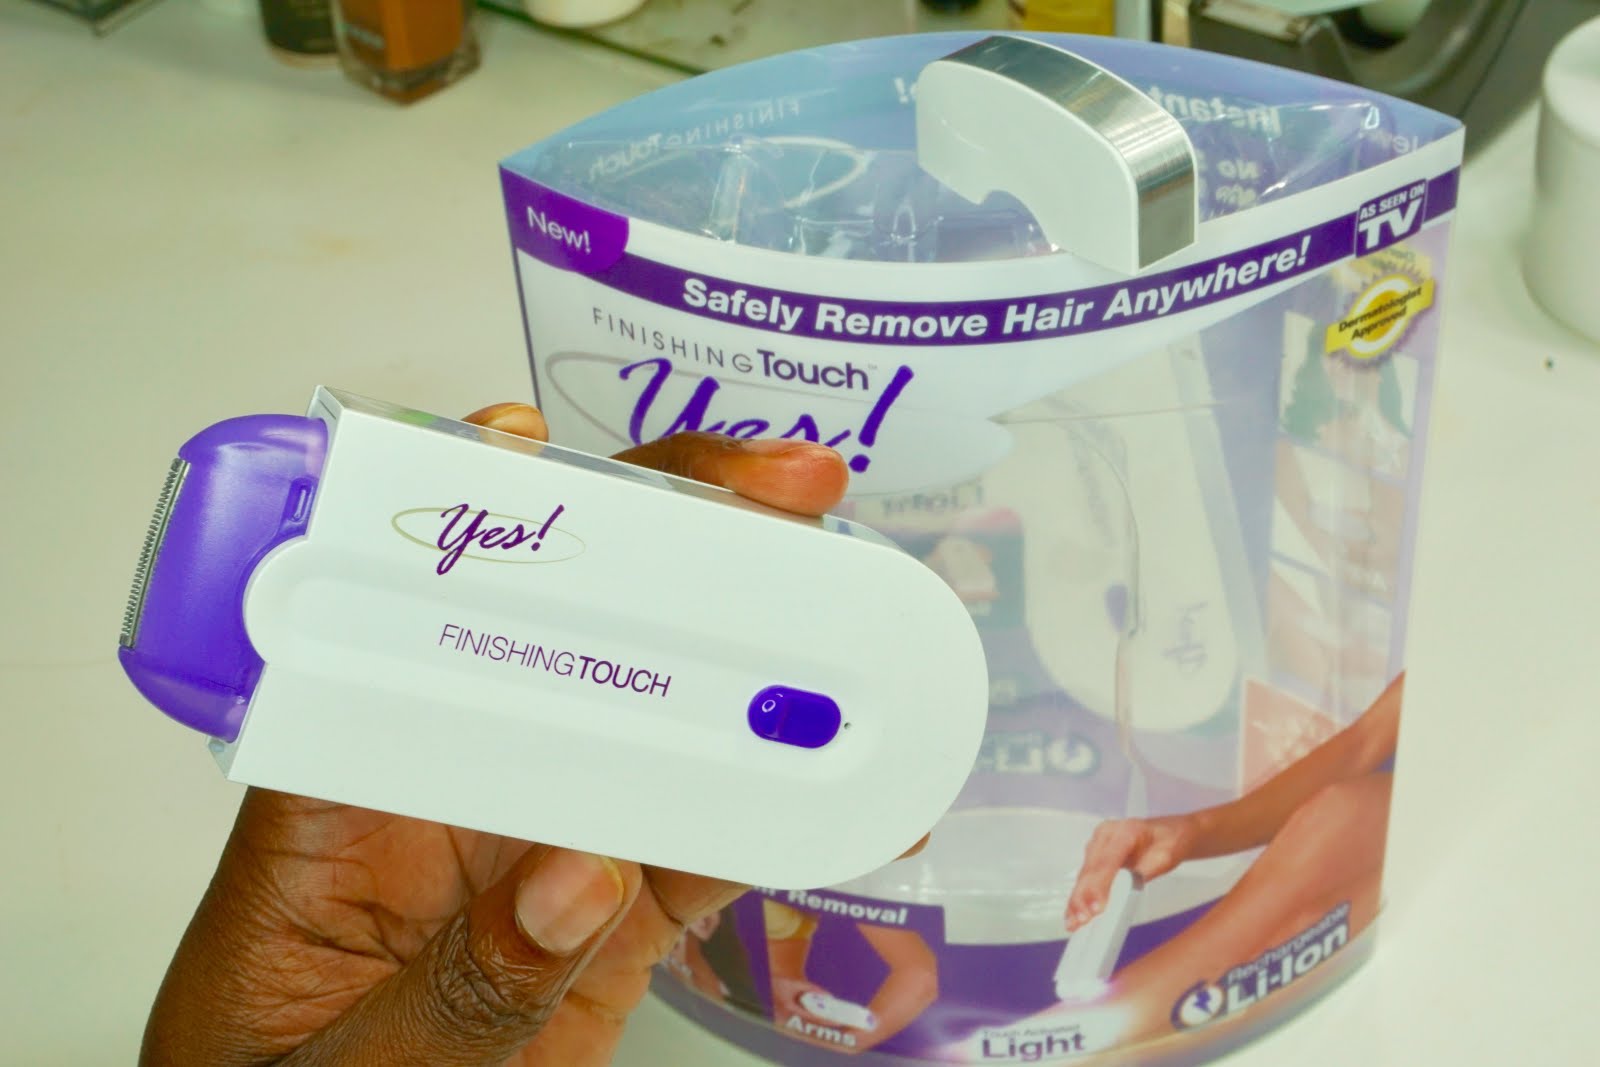 Finishing Touch Yes! Review – Pain Free Hair Remover - SKIN FIRST DAILY